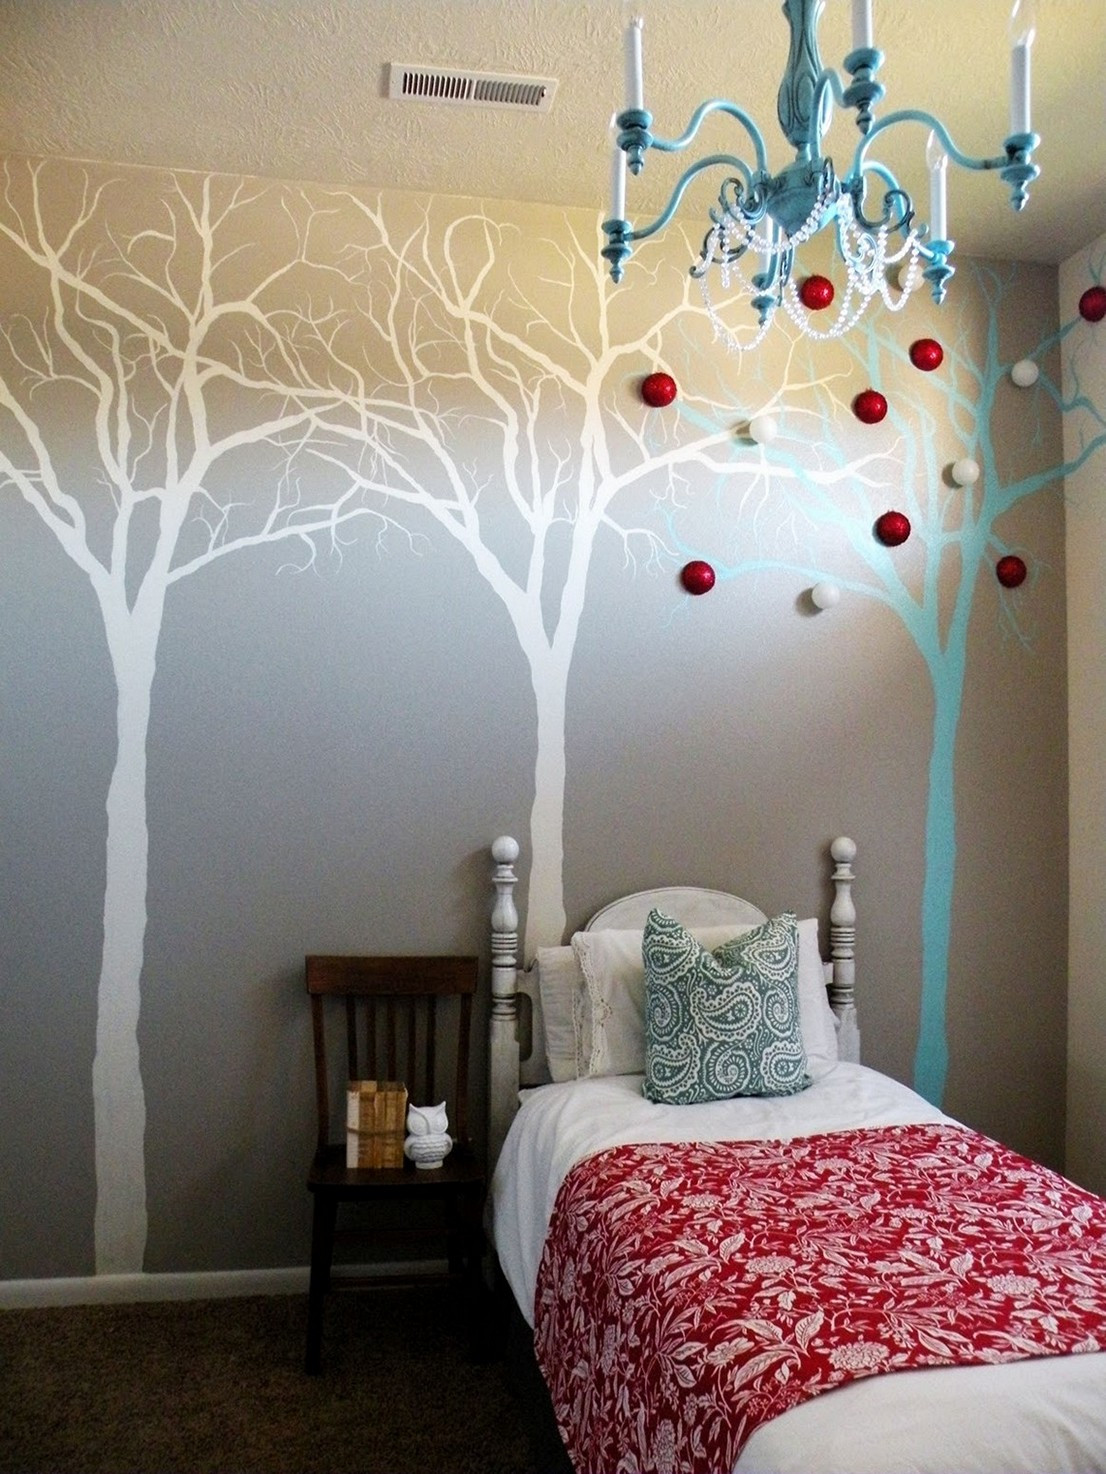 Wall Painting Ideas For Bedroom
 60 Classy And Marvelous Bedroom Wall Design Ideas – The